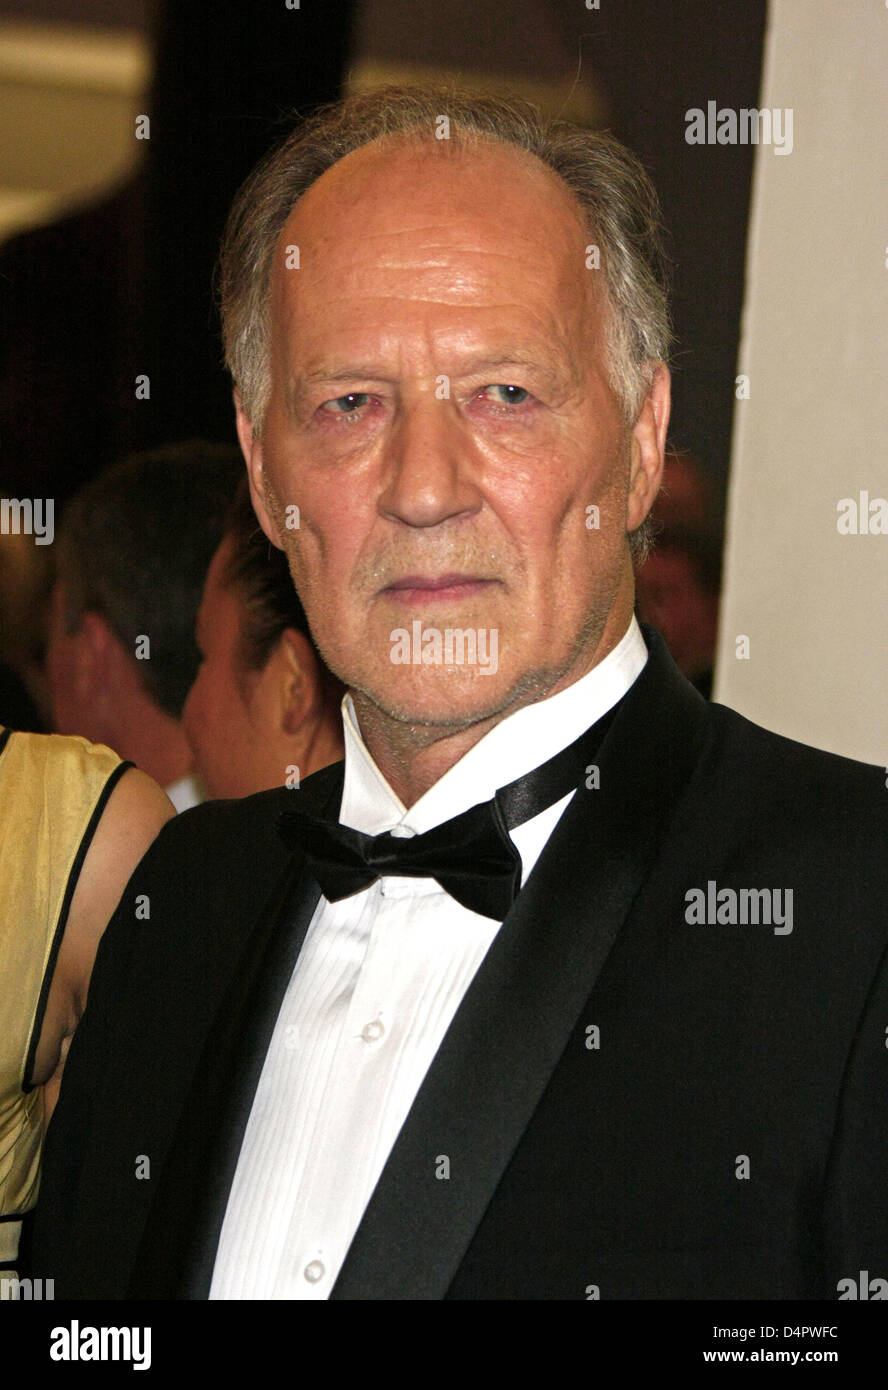 Director Werner Herzog arrives at the premiere of the film ?Bad Lieutenant: Port Of Call New Orleans? during the 2009 Venice Film Festival at Palazzo del Cinema in Venice, Italy, 04 september 2009. Photo: Hubert Boesl Stock Photo